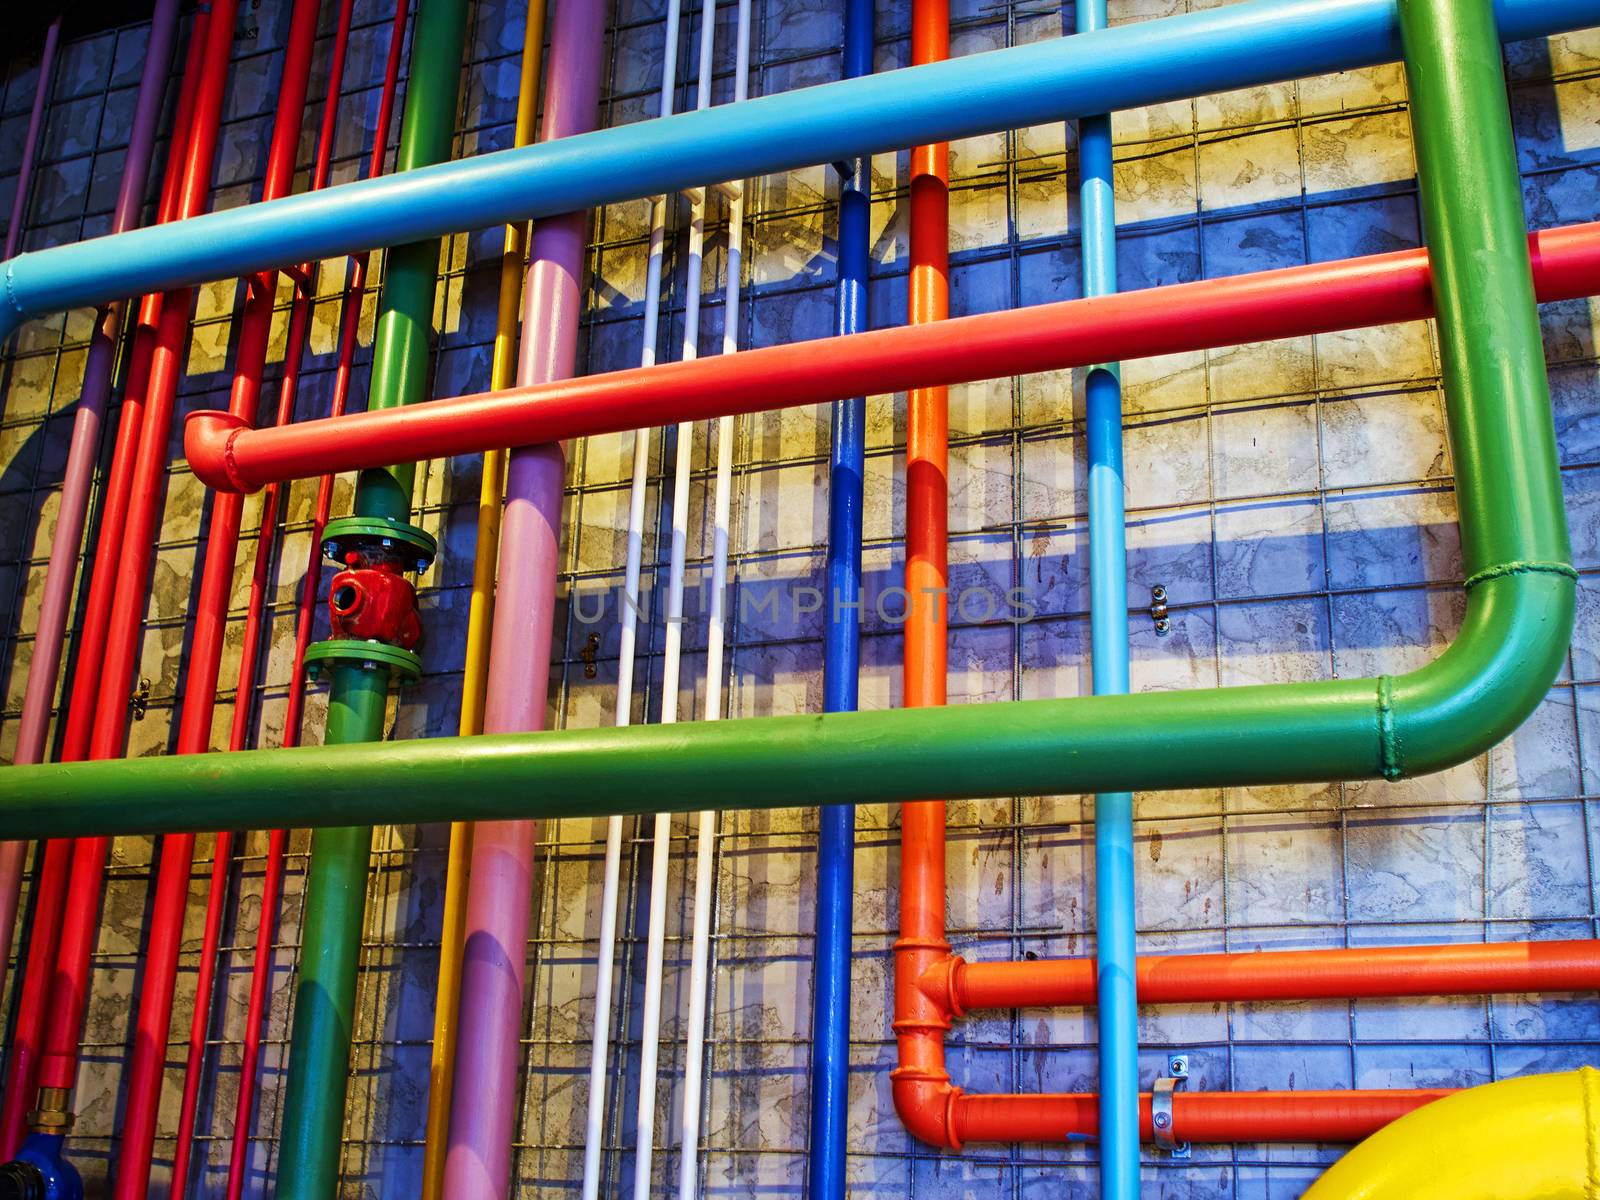 Pipes in bright strong colors by Ronyzmbow